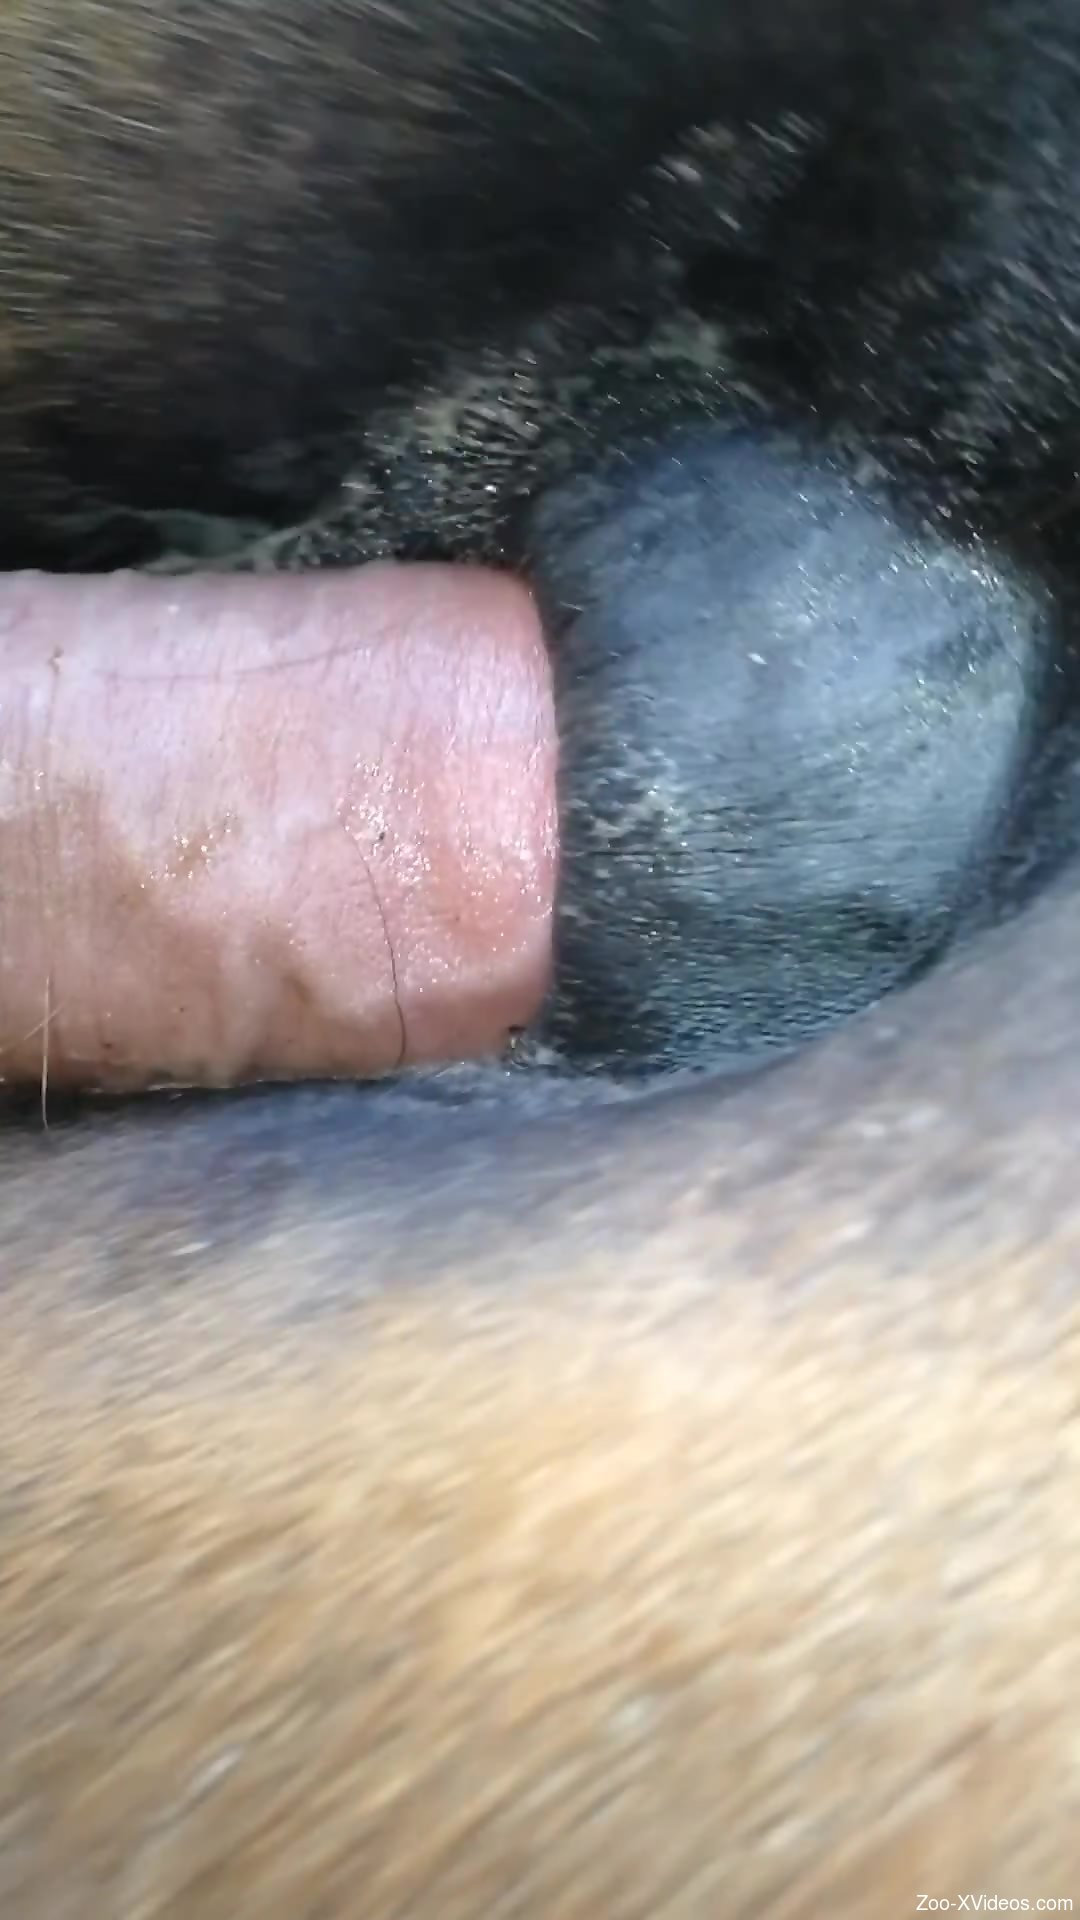 Horny dude fucking a horse's tight little asshole